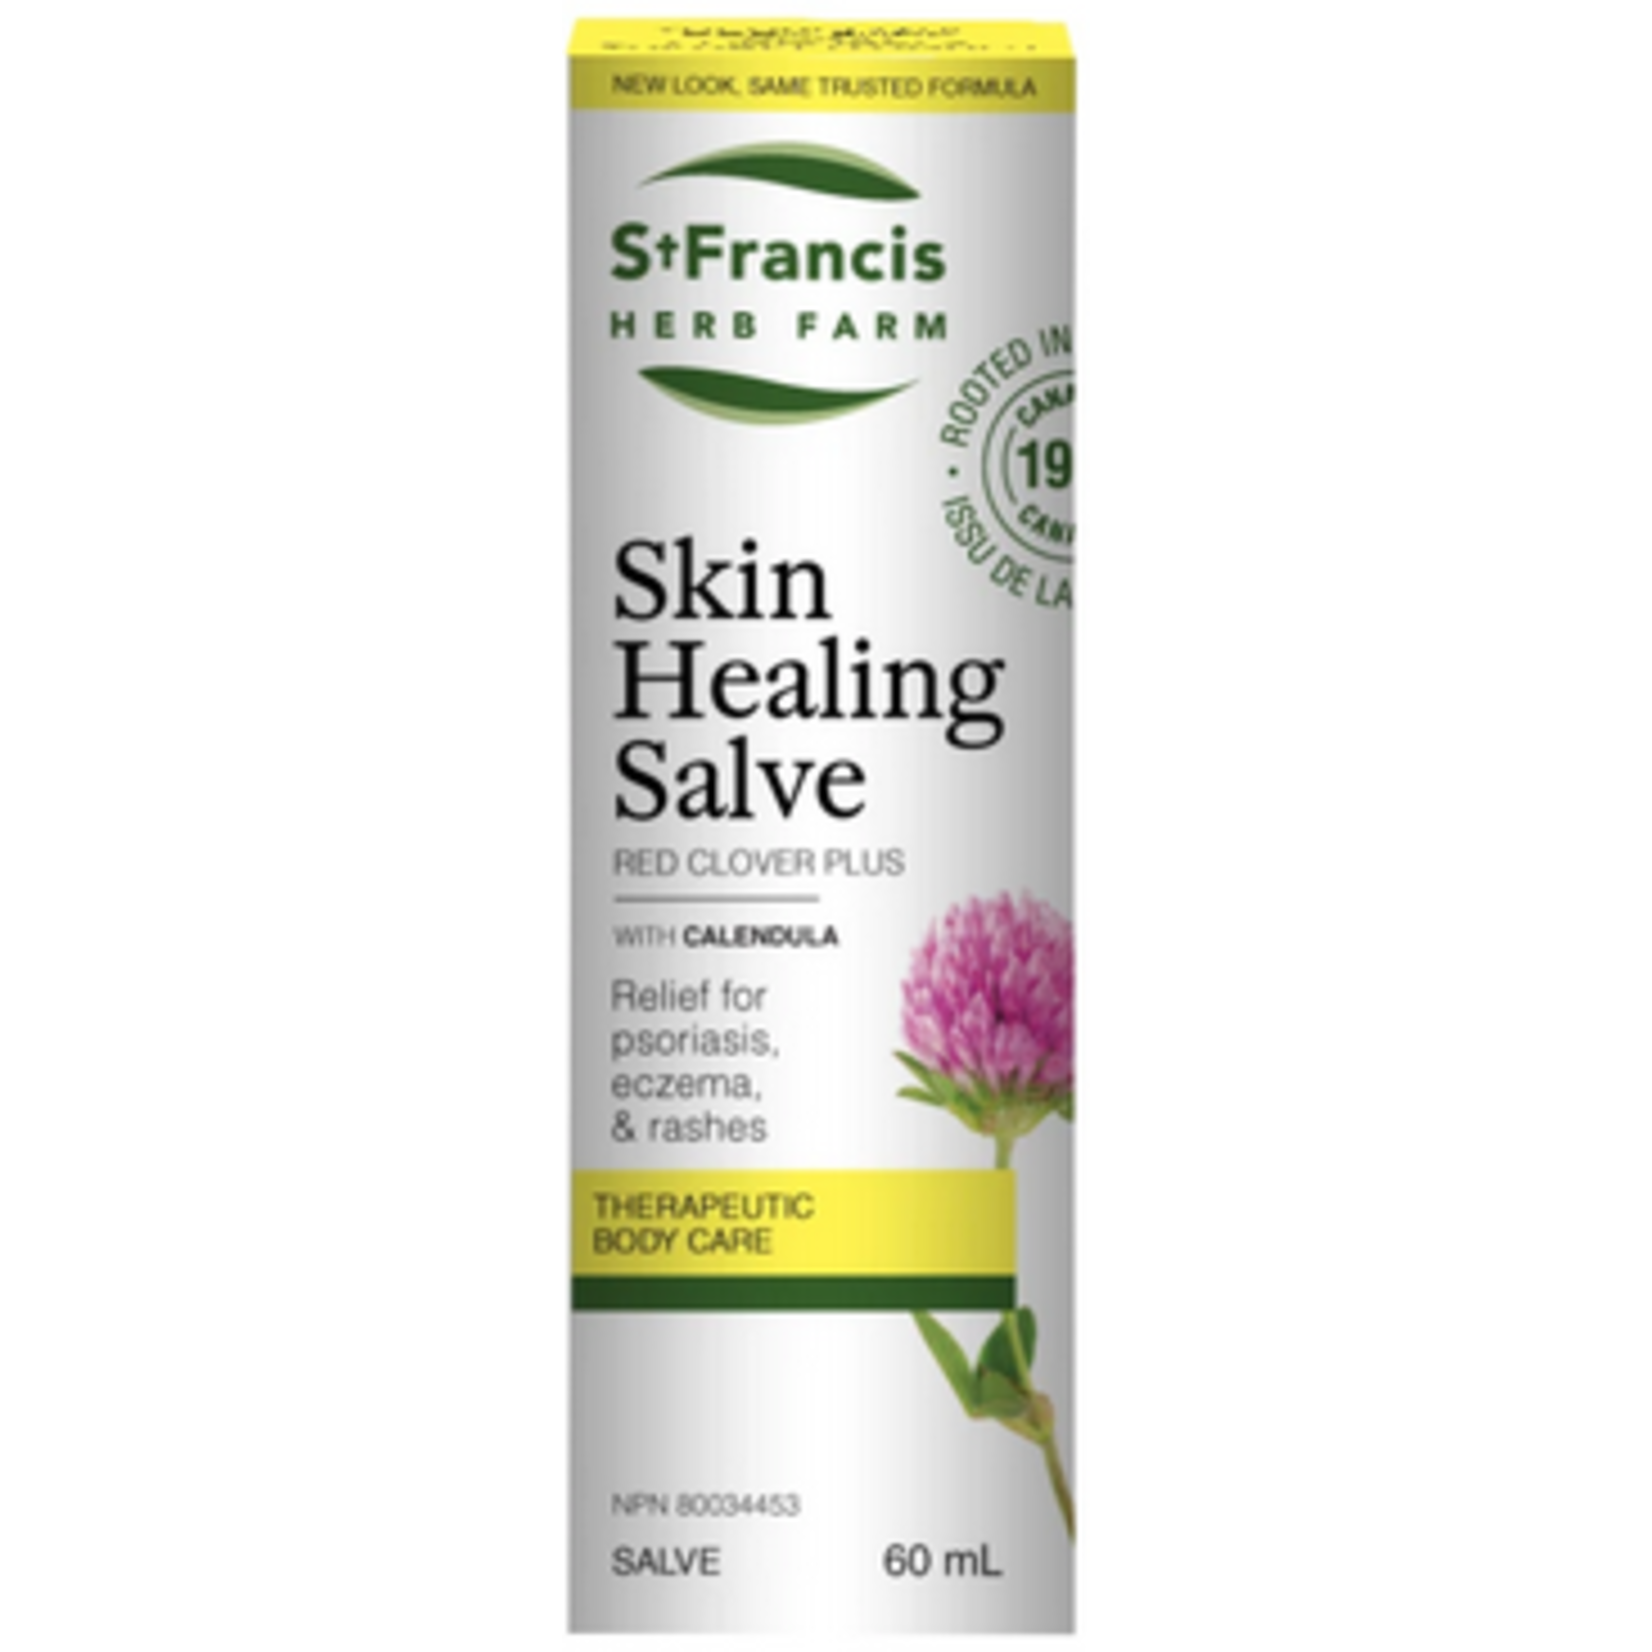 ST FRANCIS ST FRANCIS SKIN HEALING SALVE (PREVIOUSLY RED CLOVER PLUS SALVE) 60ML